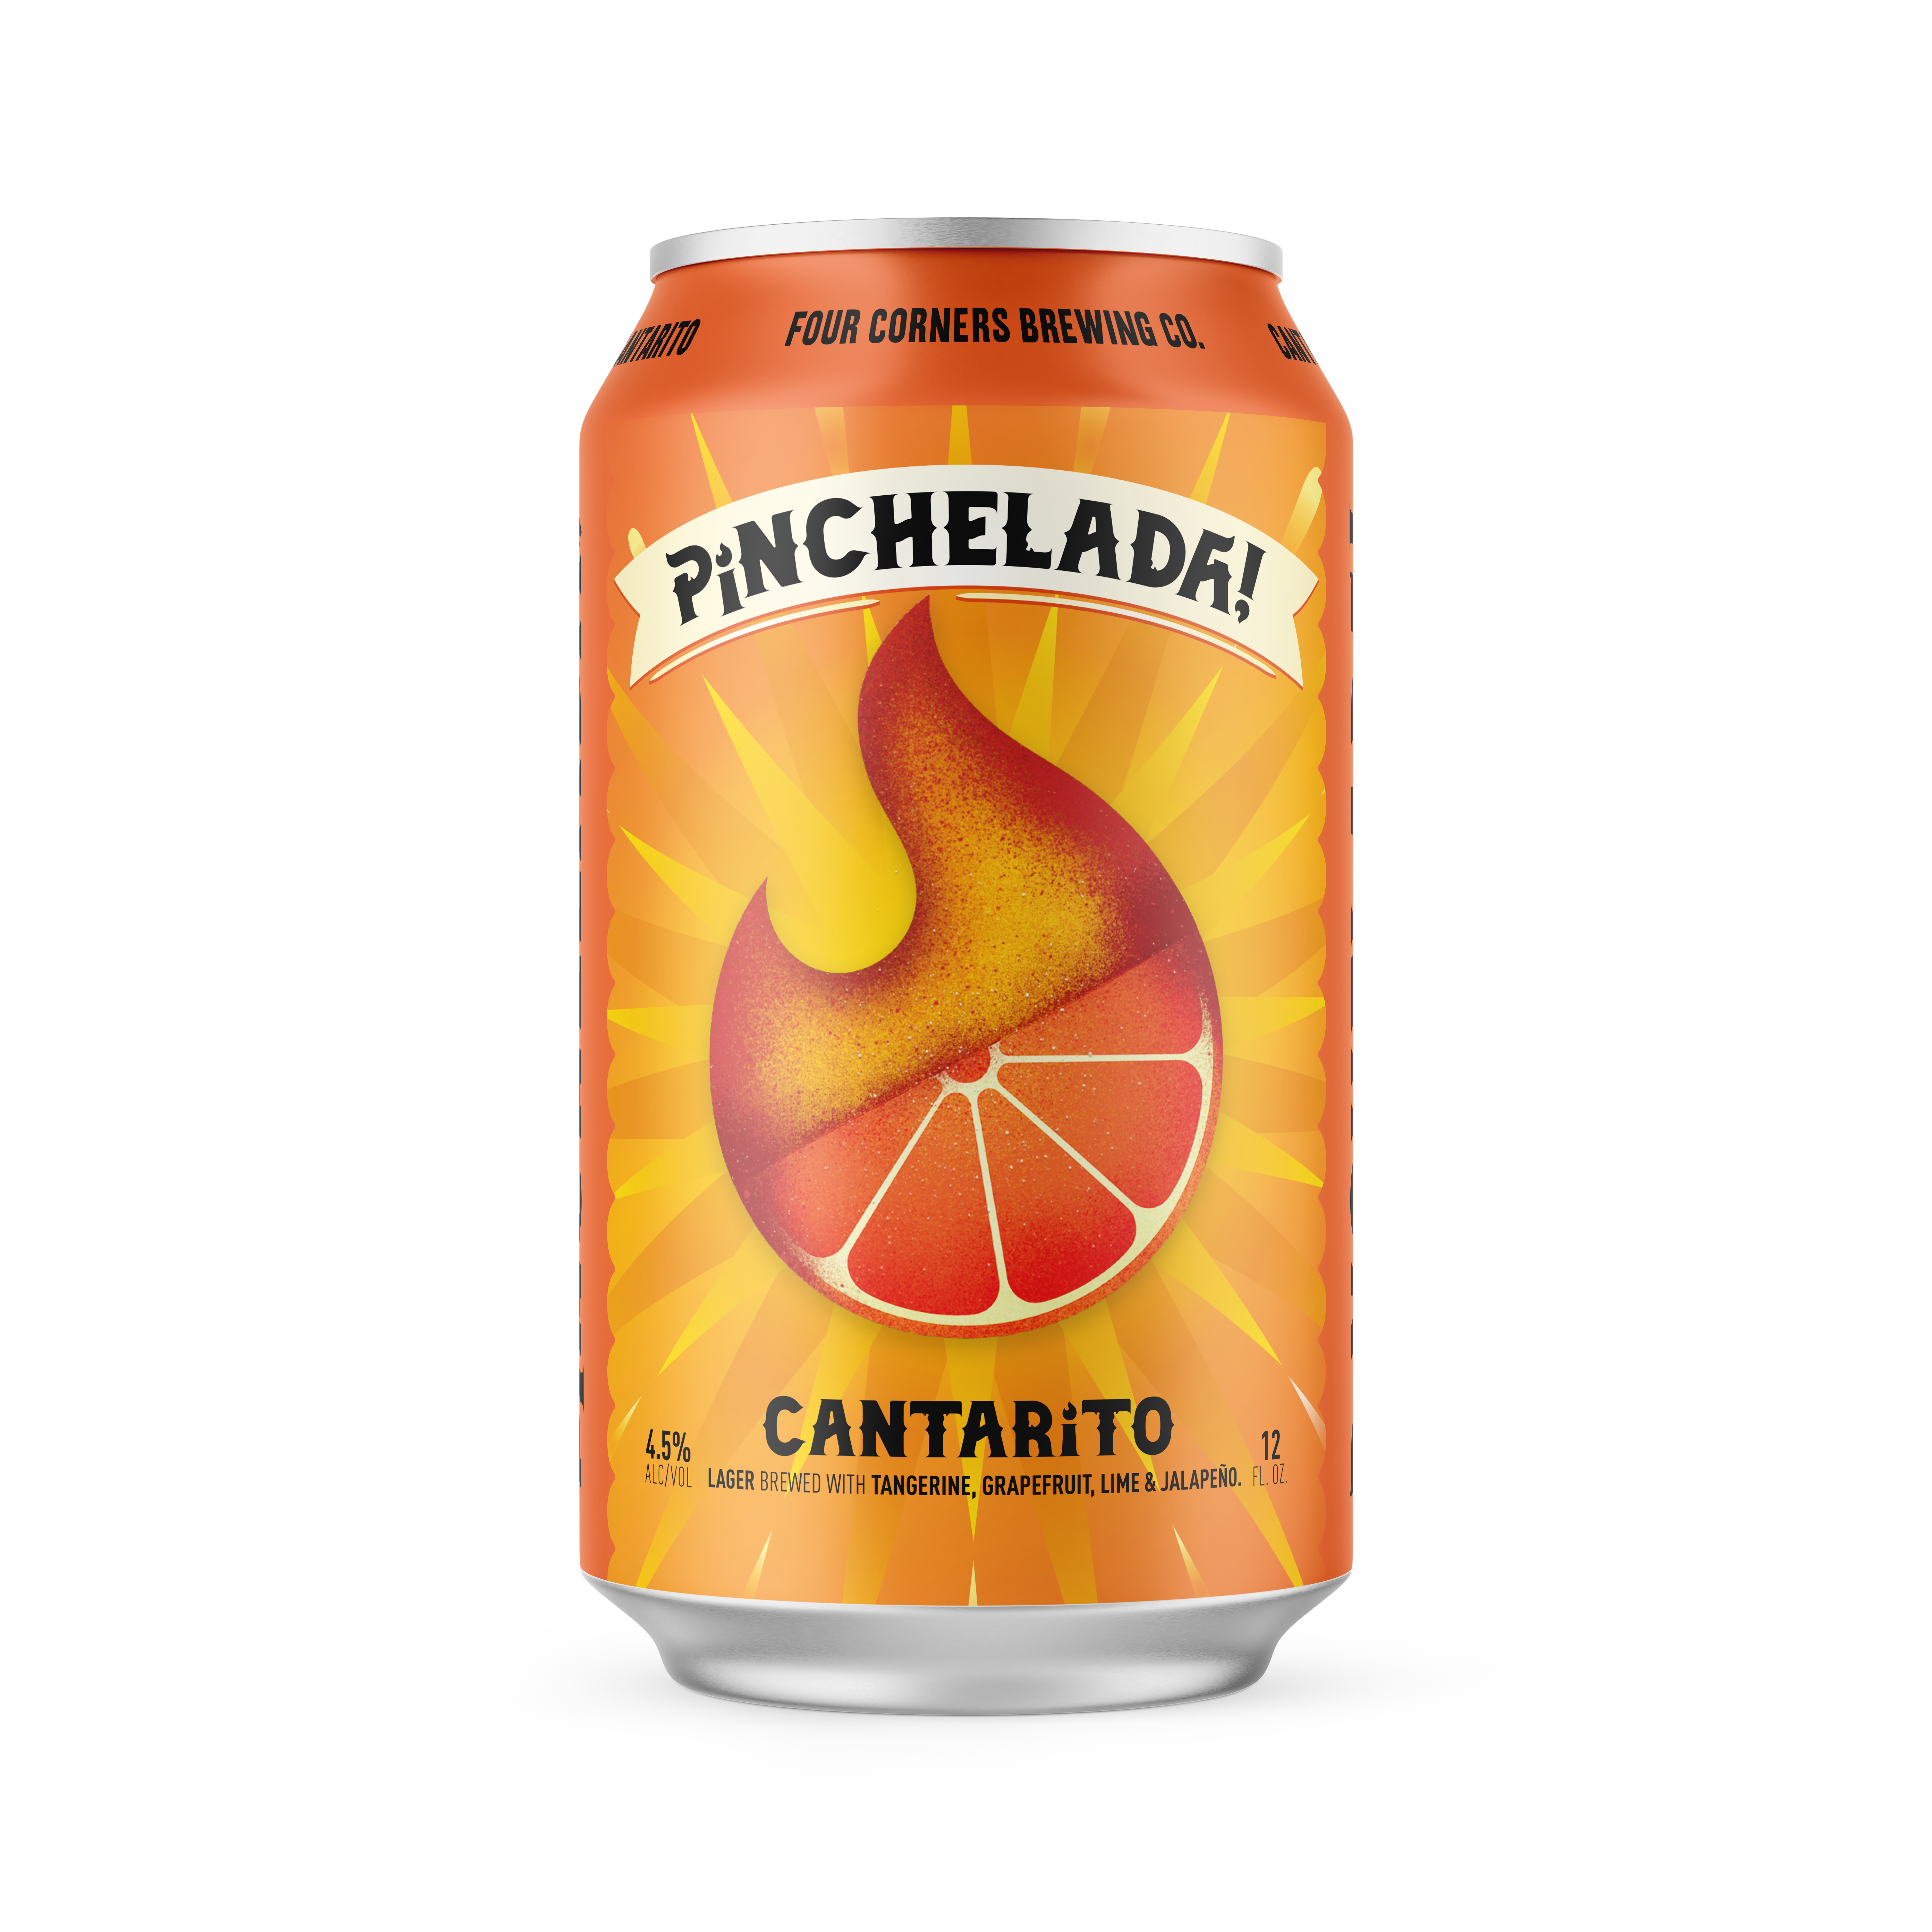 Cantarito is inspired by the bright, refreshing nature of citrus fruits. When we add these flavors to a cold, crisp lager, the result is an easy-drinking chelada. The subtle addition of jalapeño gives the brew even more character without being overpowering.